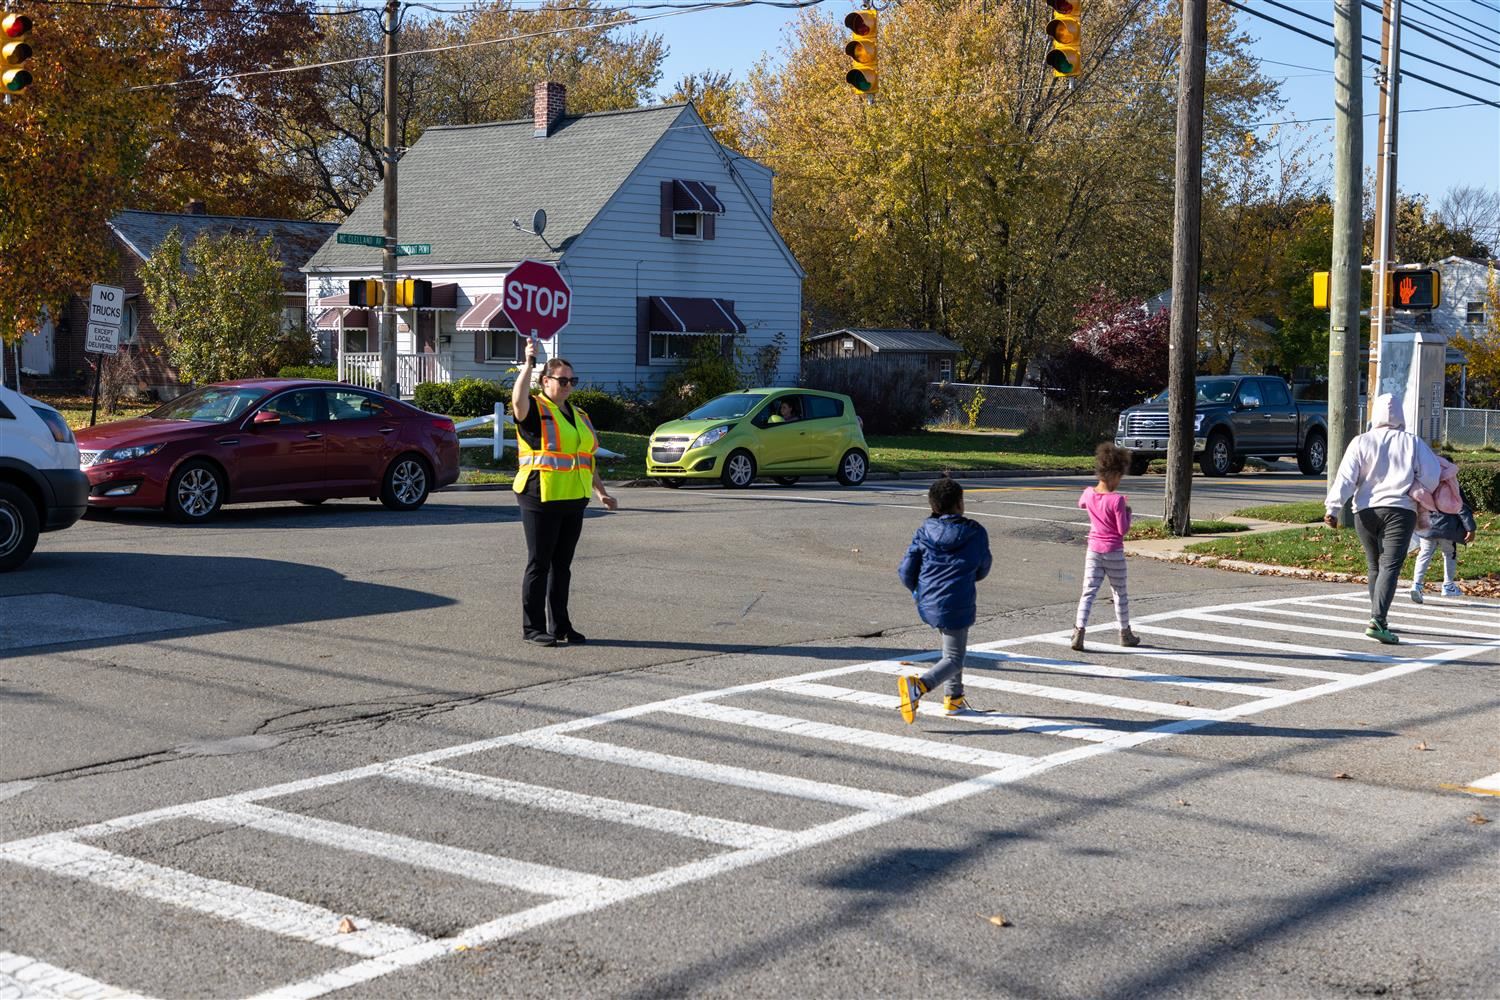 Photo of a crossing guard standing in the middle of a street intersection, holding a stop sign, while 3 children walk across.